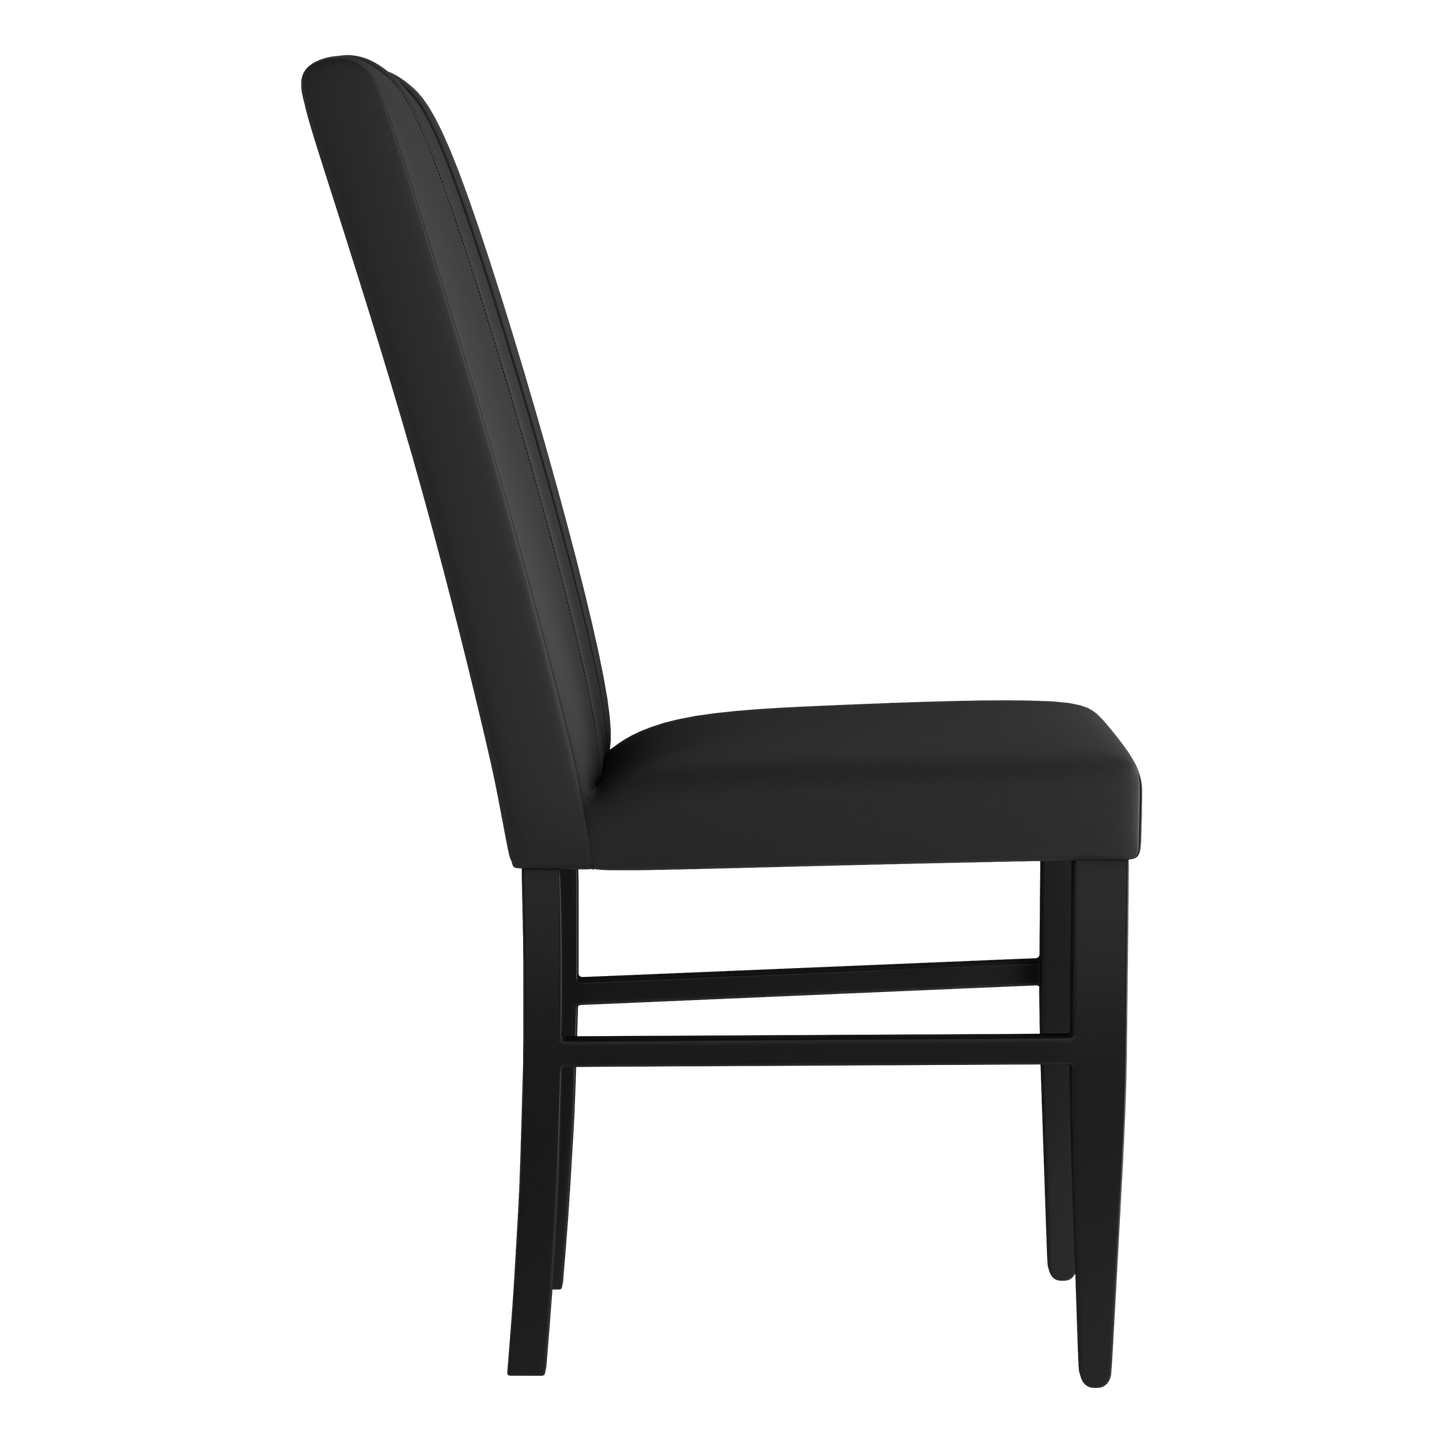 Side Chair 2000 with Georgetown Hoyas Primary Set of 2